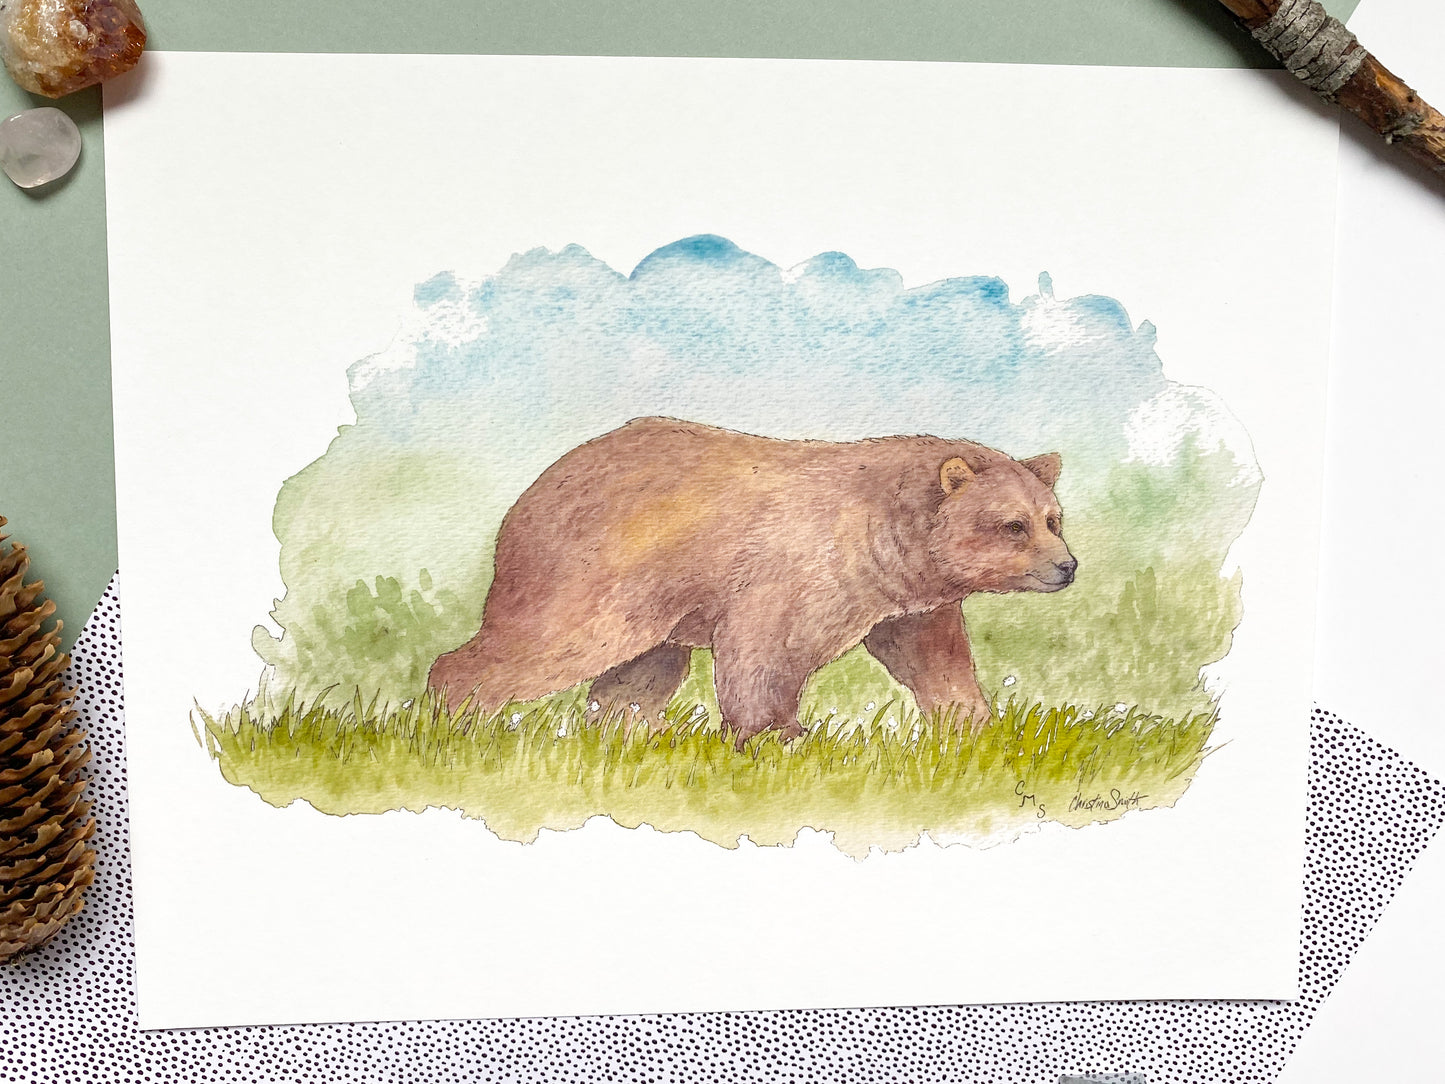 Grizzly - Limited Edition Art Print